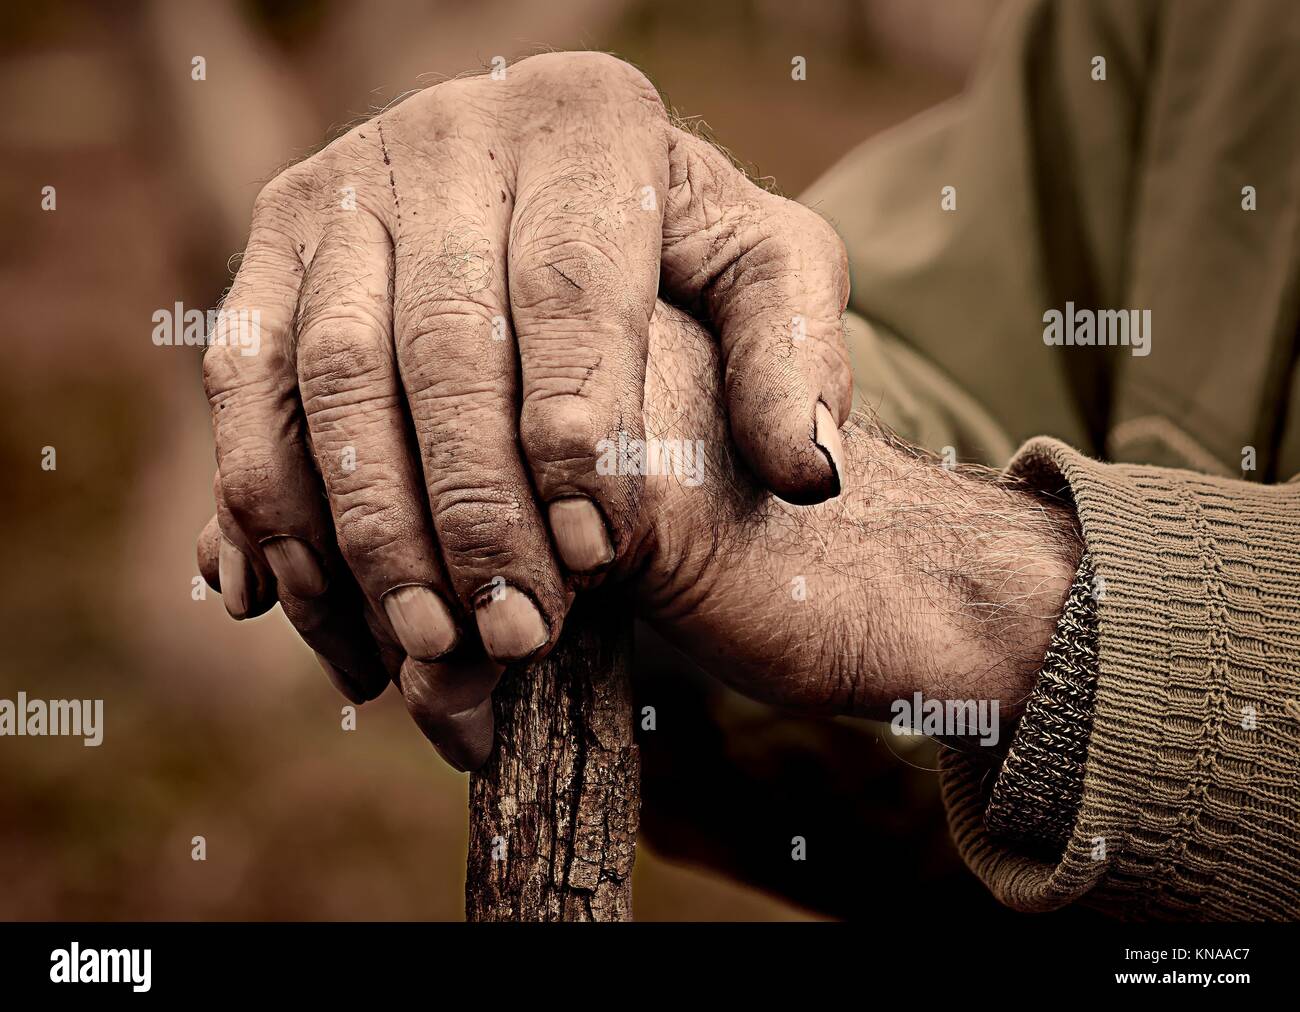 Dramatic photo of an elderly man hand holding a staff. Stock Photo